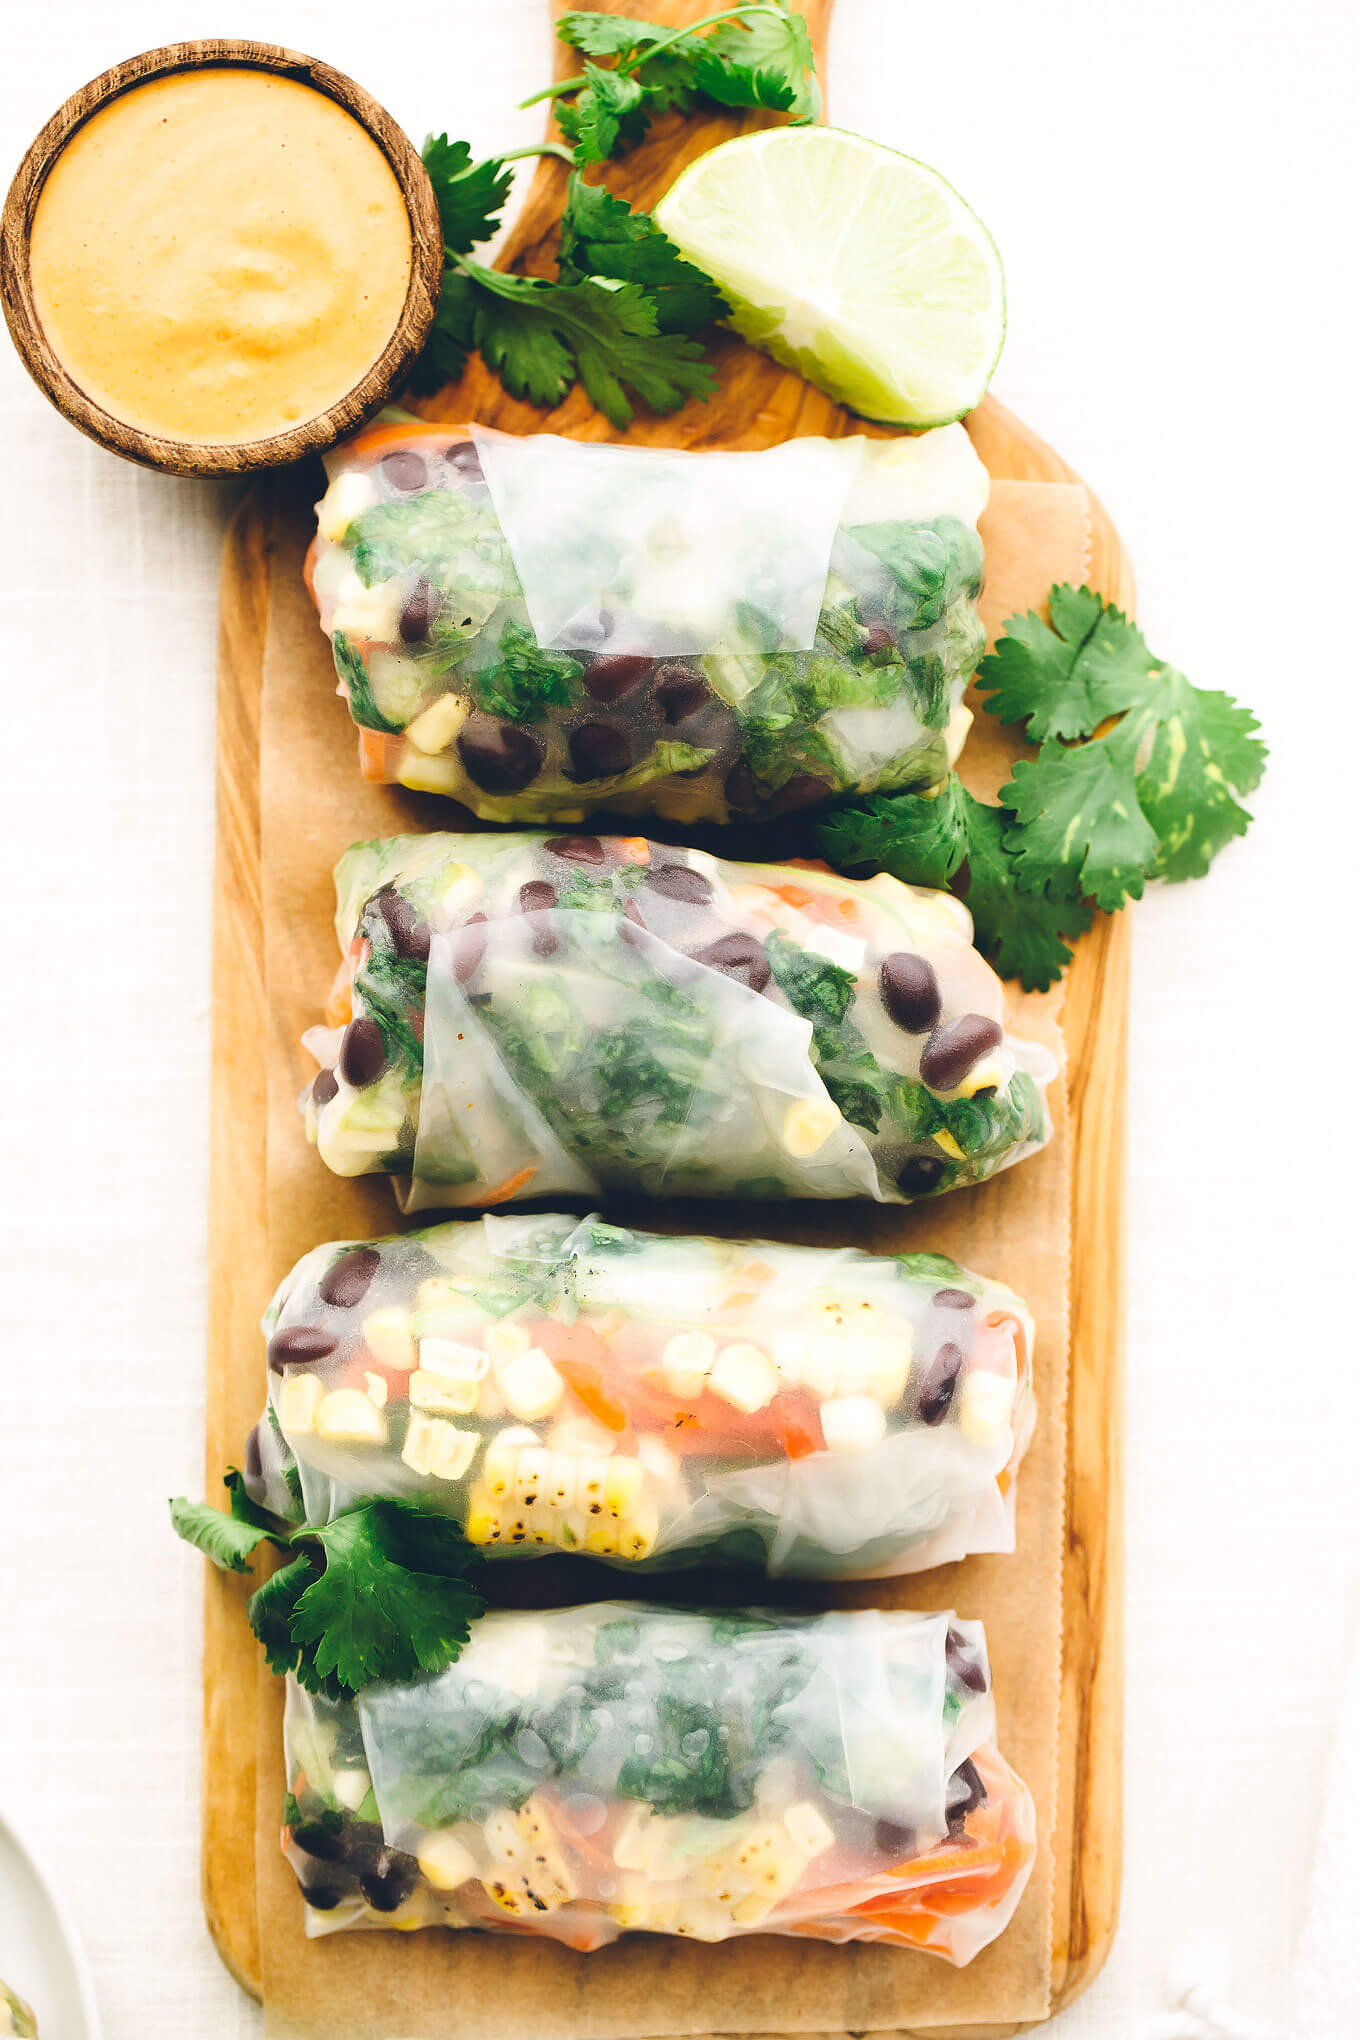 Southwest Vegan Spring Rolls with Smoky Chipotle Sauce